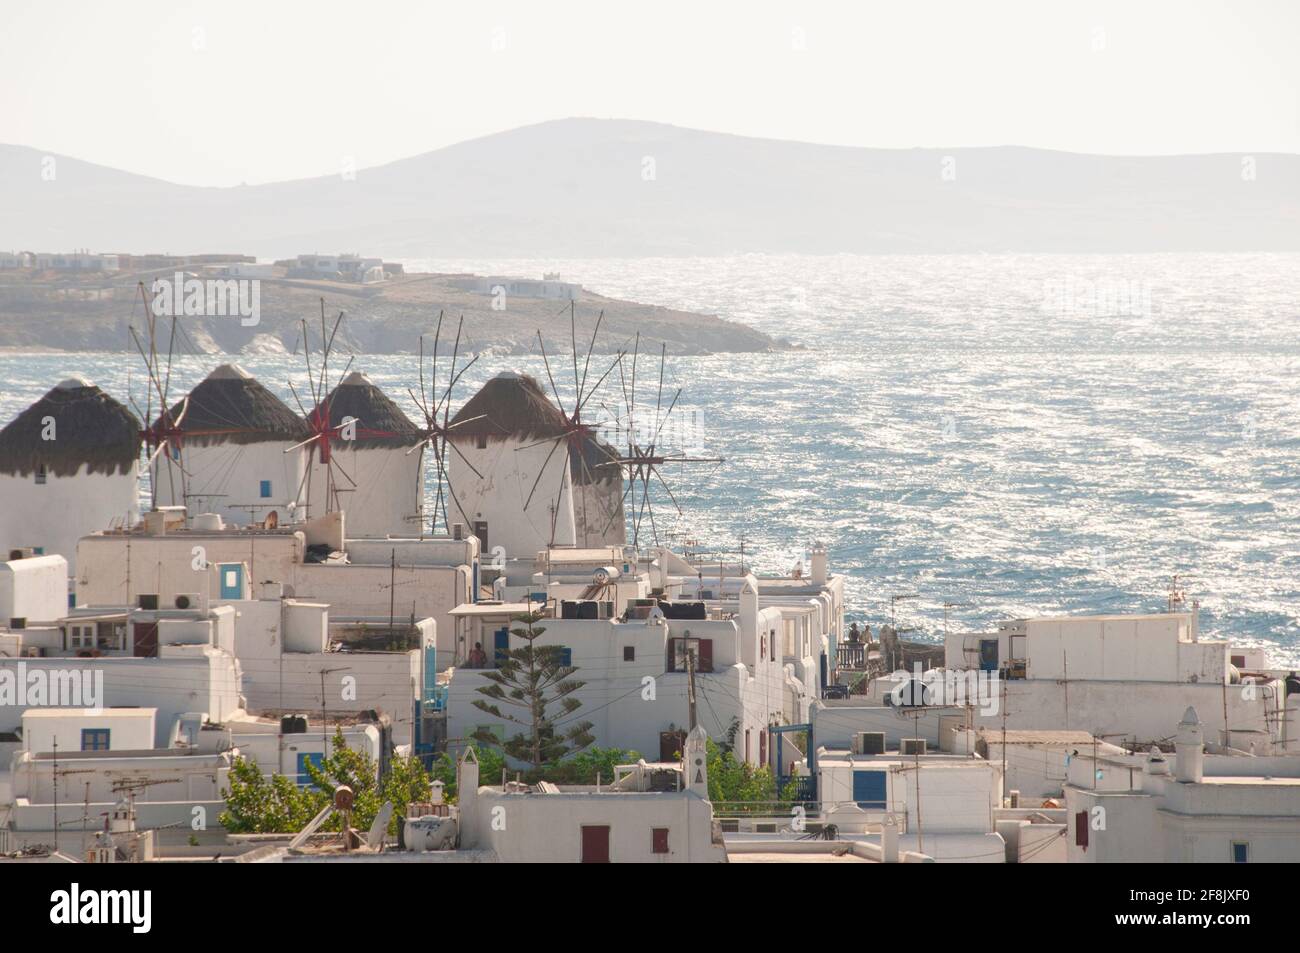 Panoramic view of Mykonos island village (Chora) with traditional Cycladic houses, windmills, and the Aegean Sea in the background Stock Photo